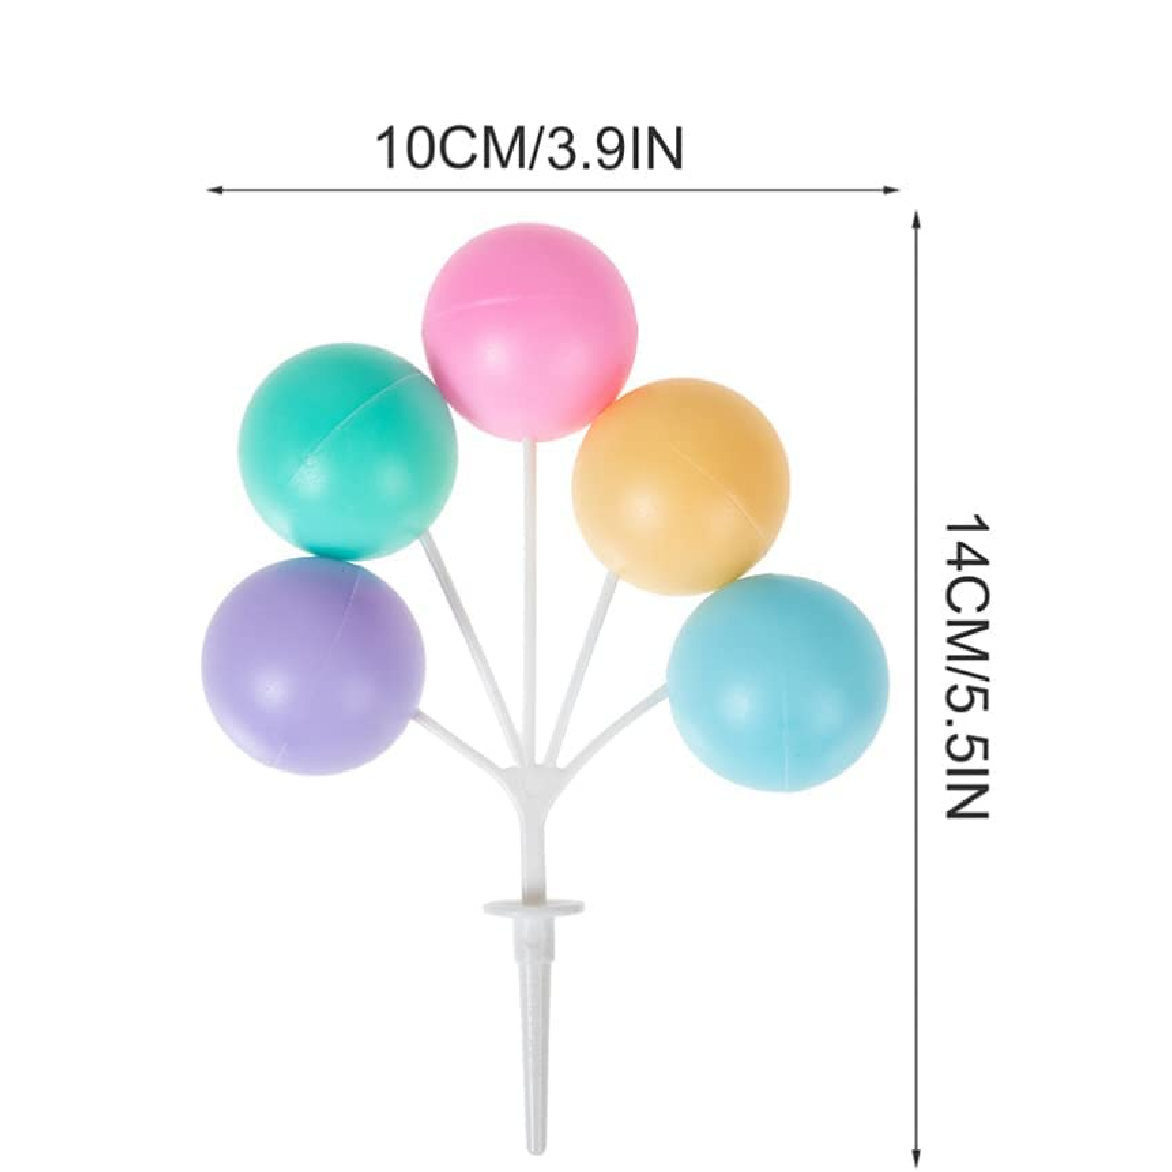 Cake Topper, Cupcake Decoration - Colourful Balloons